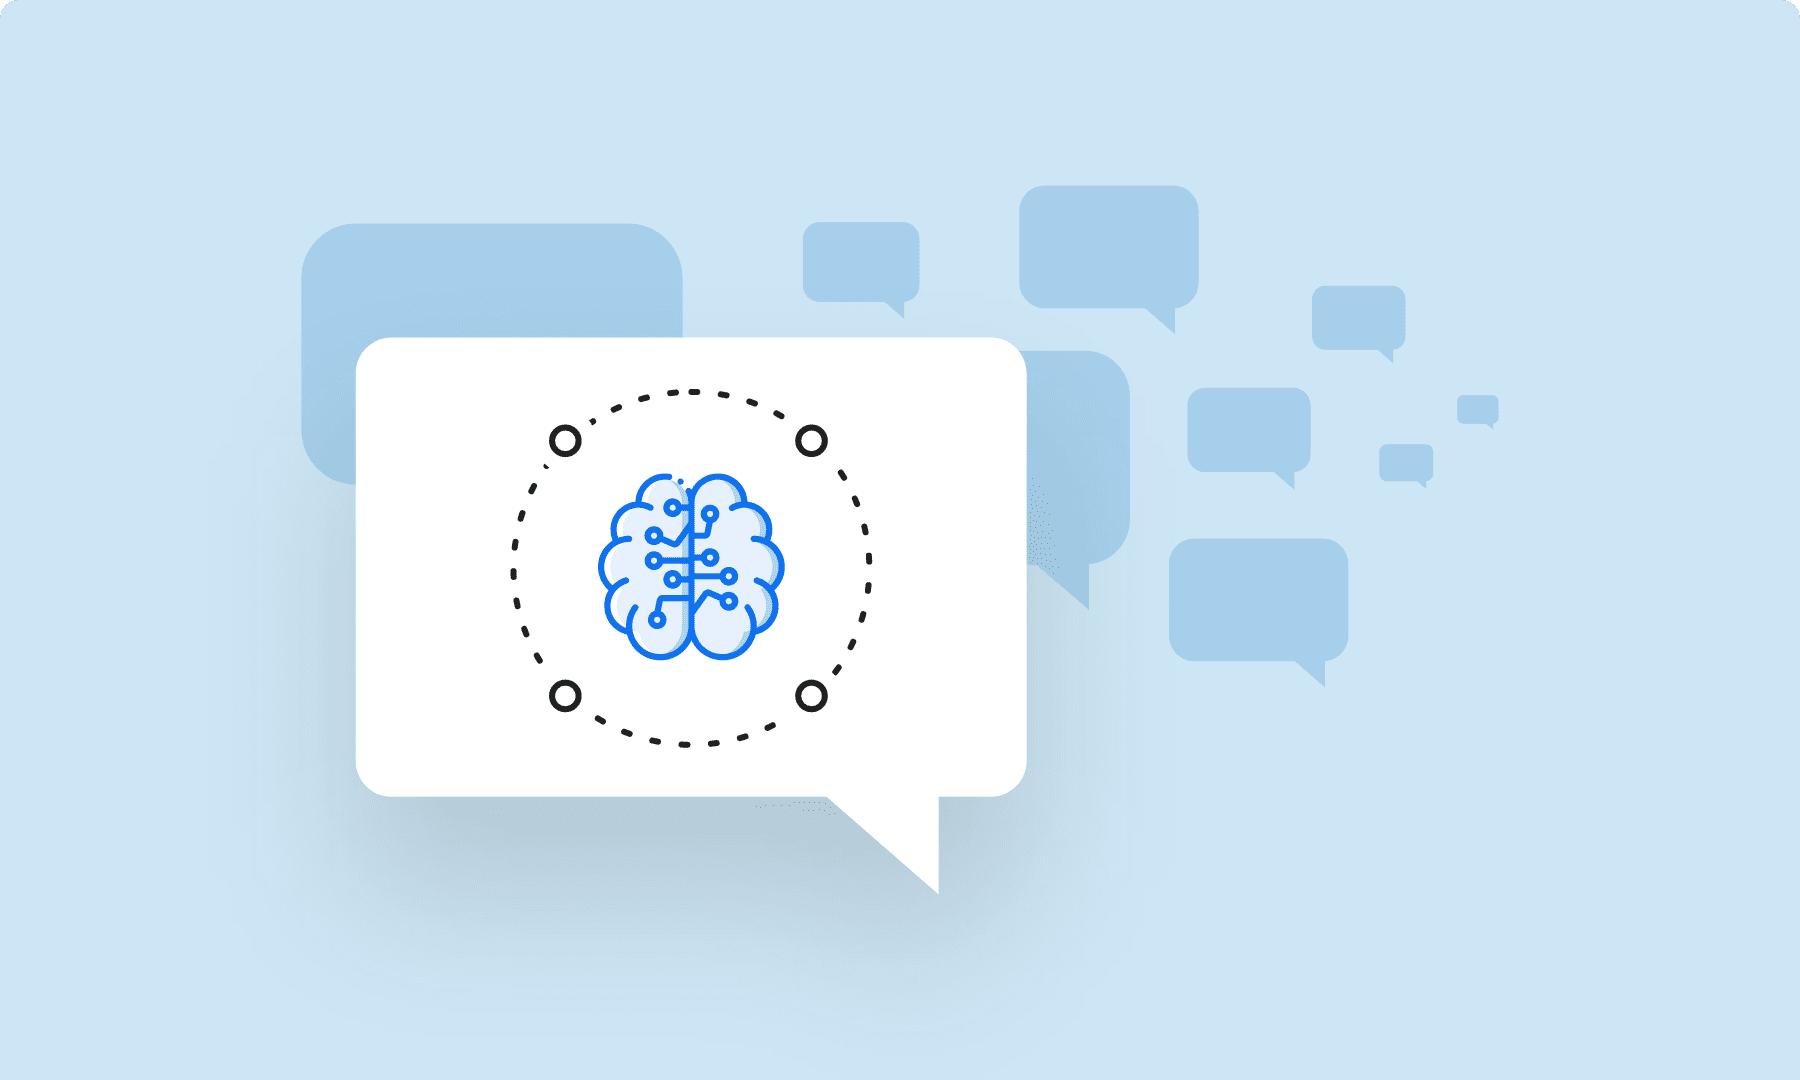 It’s not just a chatbot, it’s conversational AI